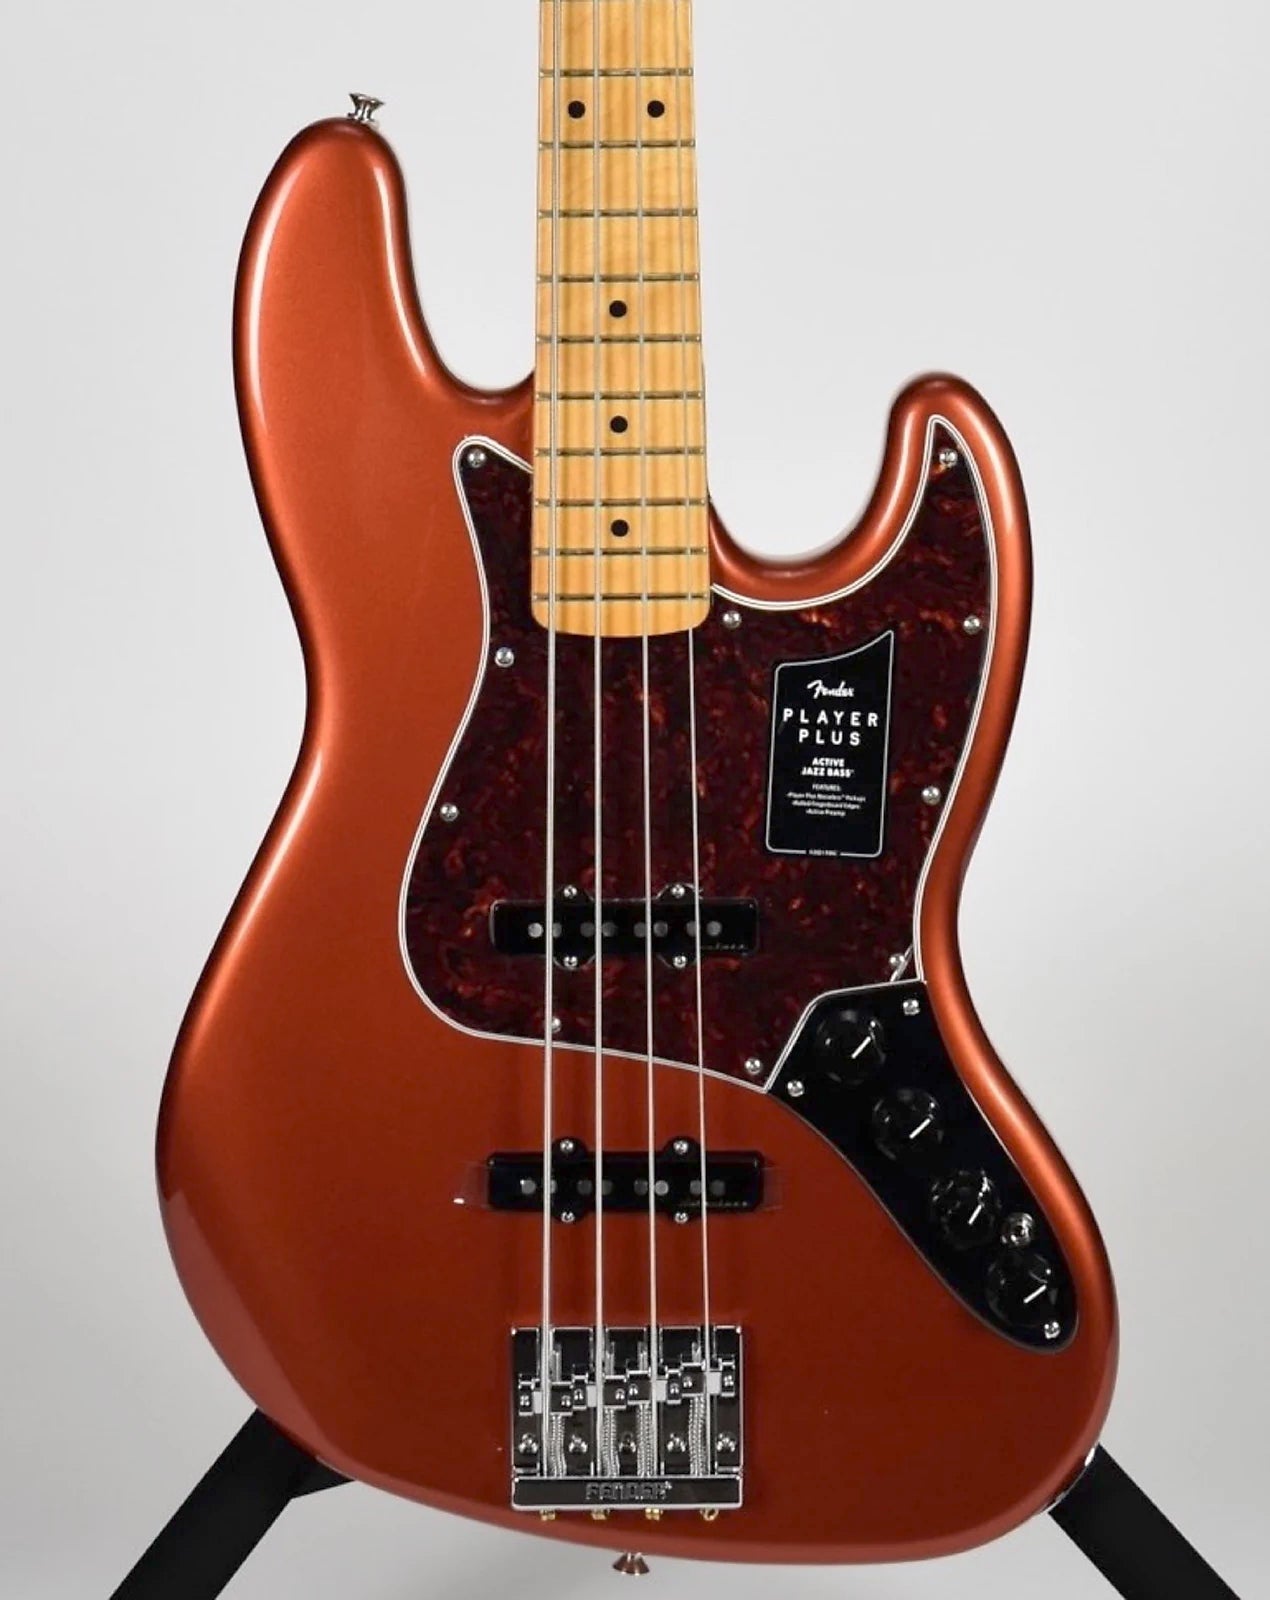 USED Fender Player Plus Jazz Bass with Maple Fingerboard - Aged Candy Apple Red